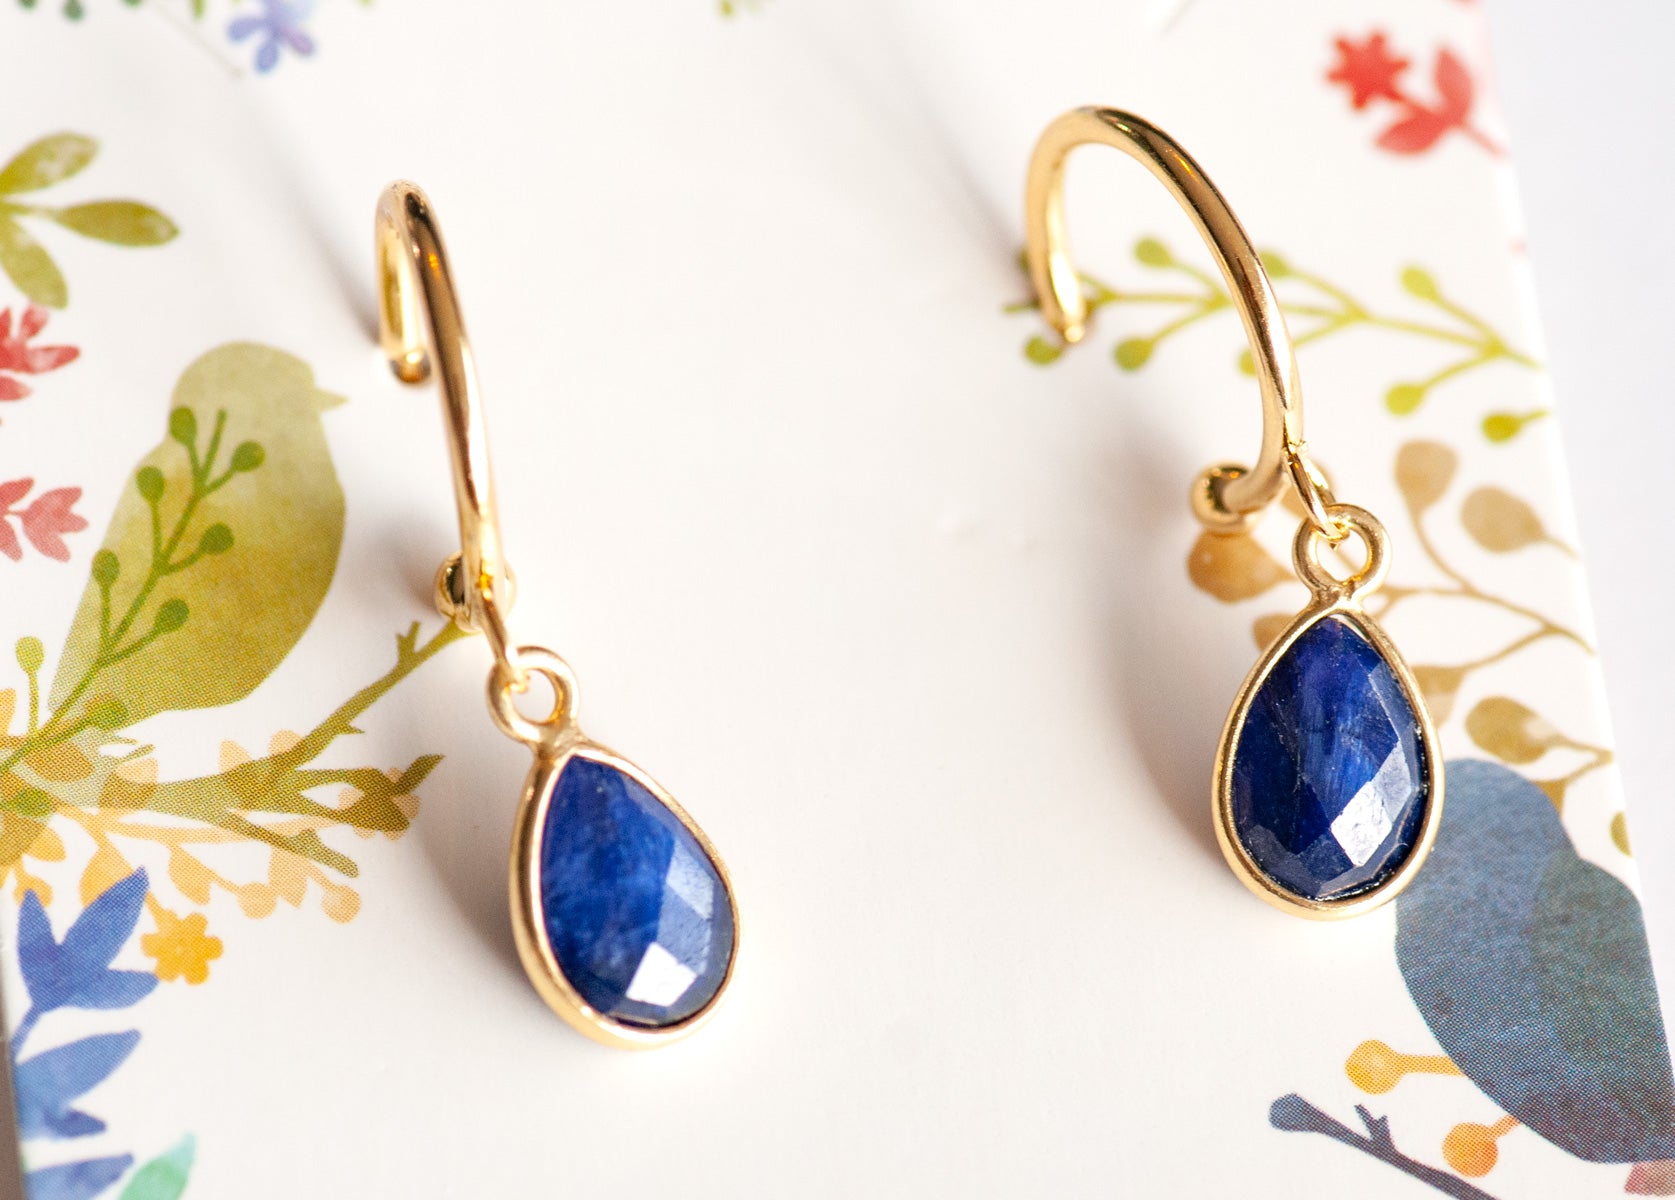 Small Sapphire birthstone earrings with gold hoops